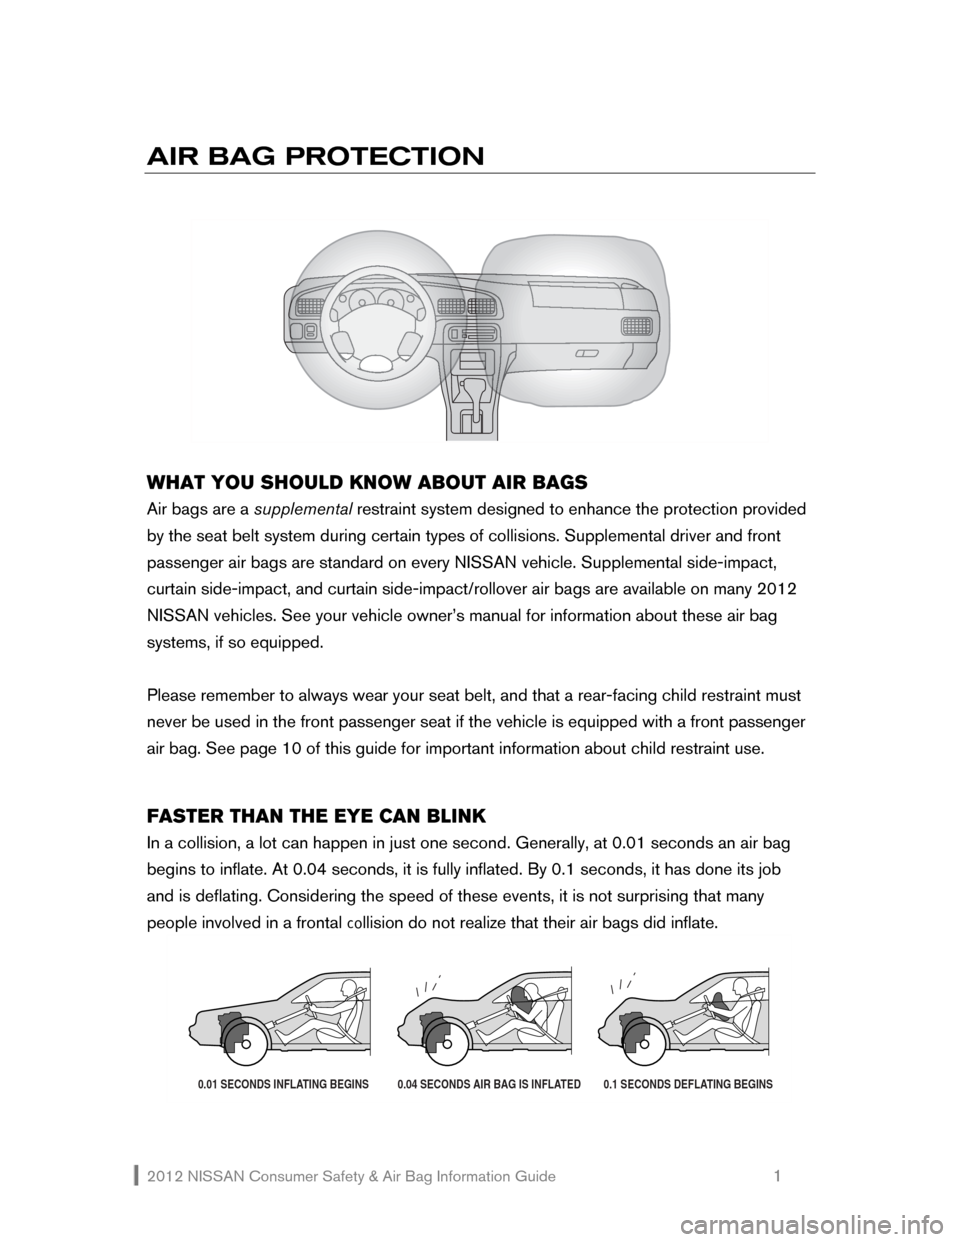 NISSAN NV200 2012 1.G Consumer Safety Air Bag Information Guide 2012 NISSAN Consumer Safety & Air Bag Information Guide                                                   1 
AIR BAG PROTECTION 
    
 
 
WHAT YOU SHOULD KNOW ABOUT AIR BAGS 
Air bags are a supplement